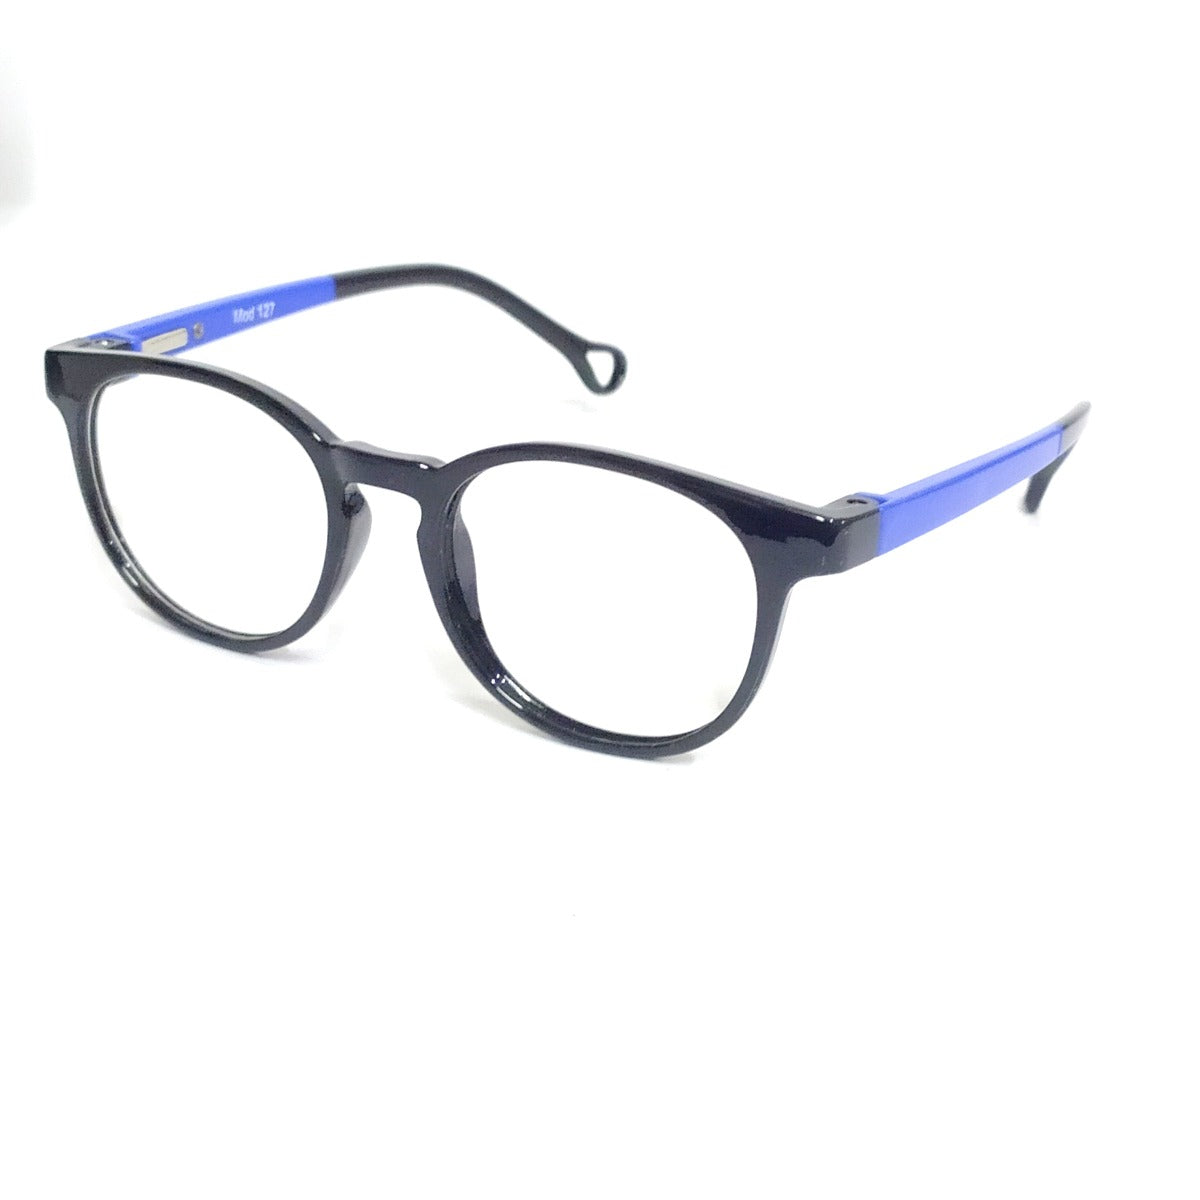 Round Black-Blue Kids Glasses for 5-6 Years